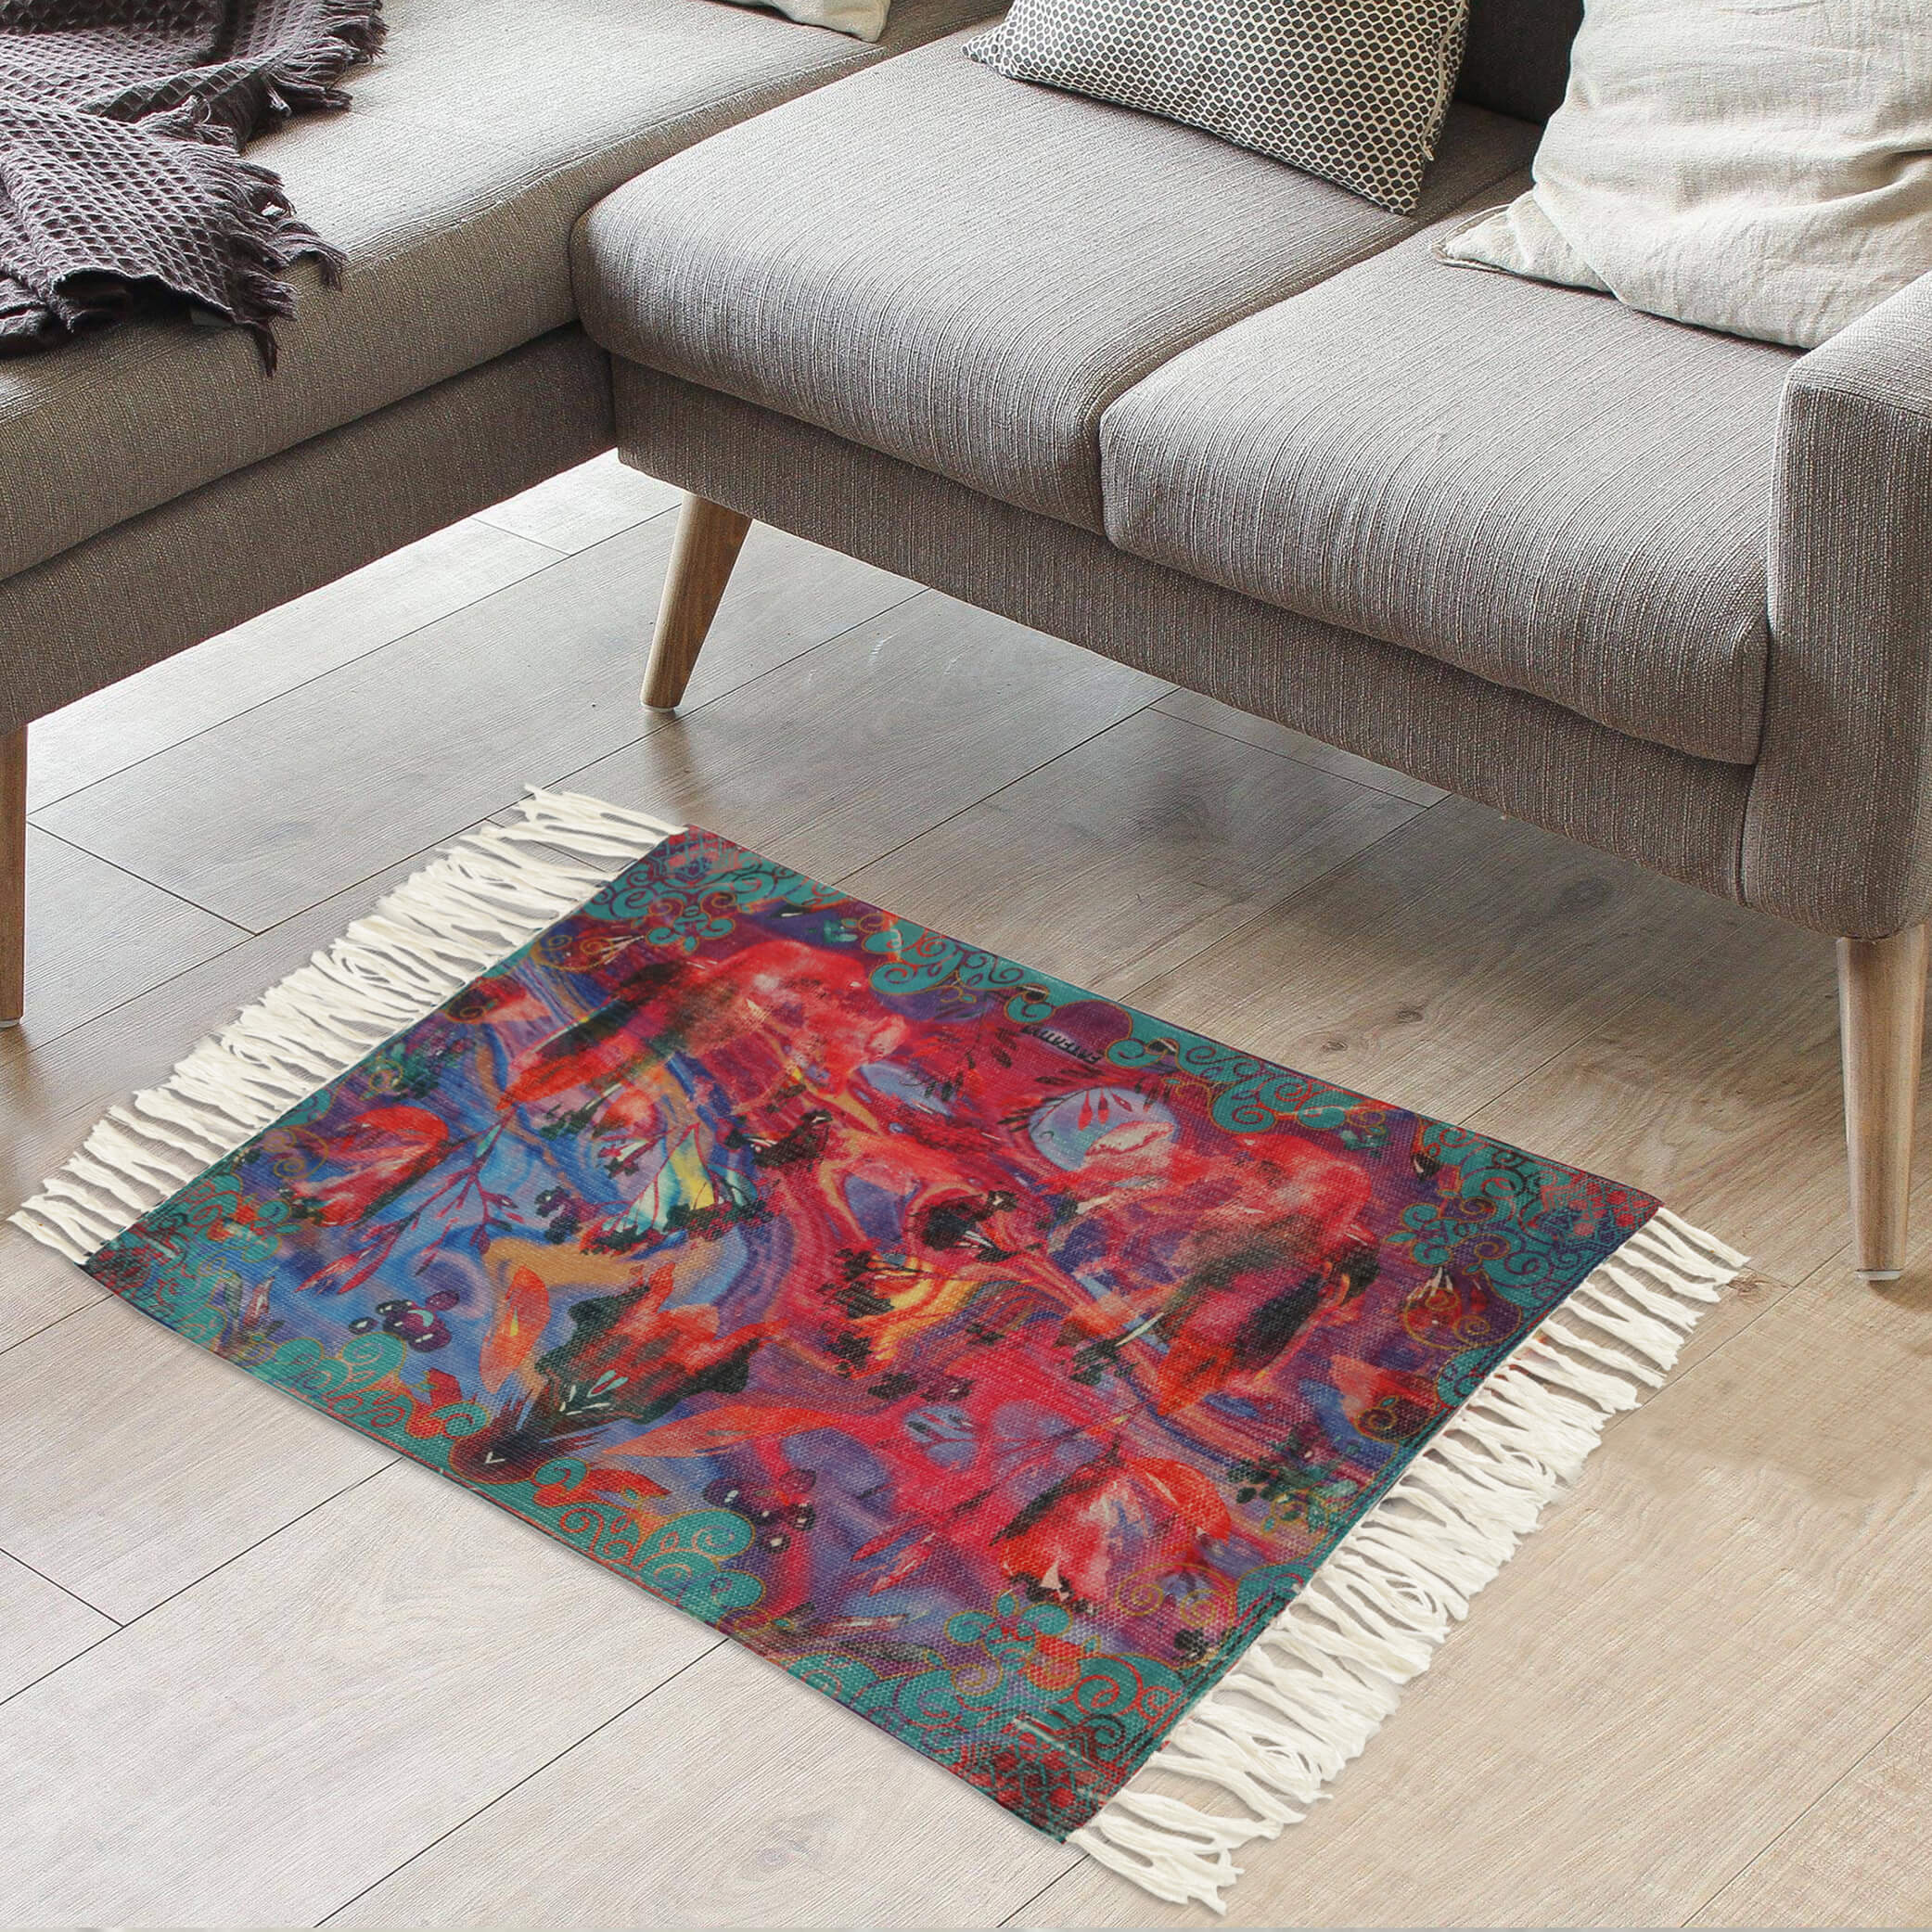 Buy Beautiful Design Recycled Area Rug Online